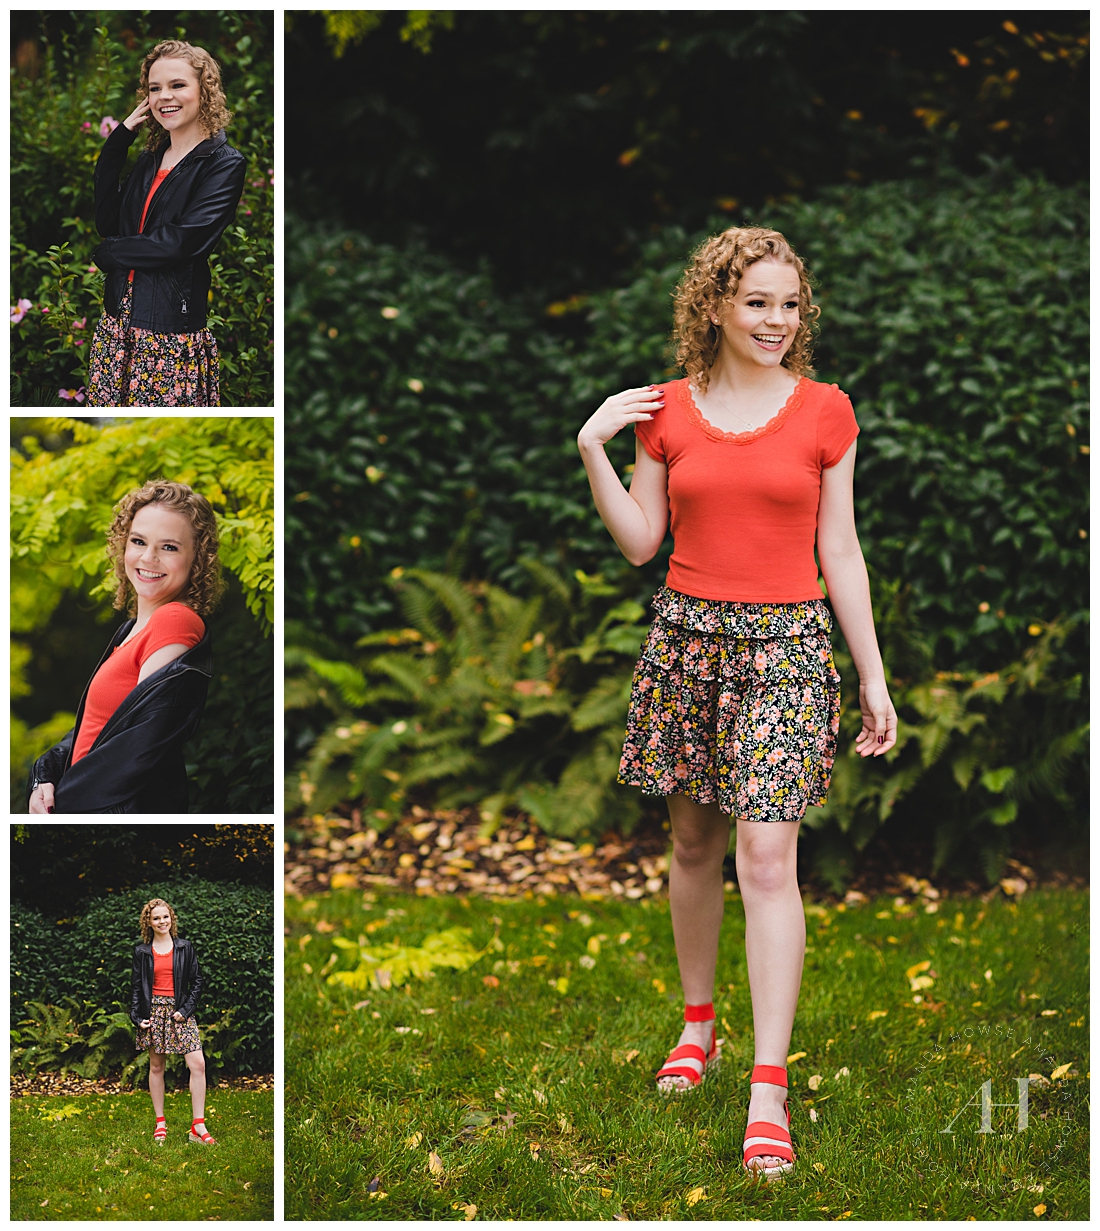 Garden Portraits of Modern High School Senior | How to style naturally curly hair for senior portraits, glam makeup ideas, fall outfit inspiration | Photographed by the Best Tacoma Senior Photographer Amanda Howse